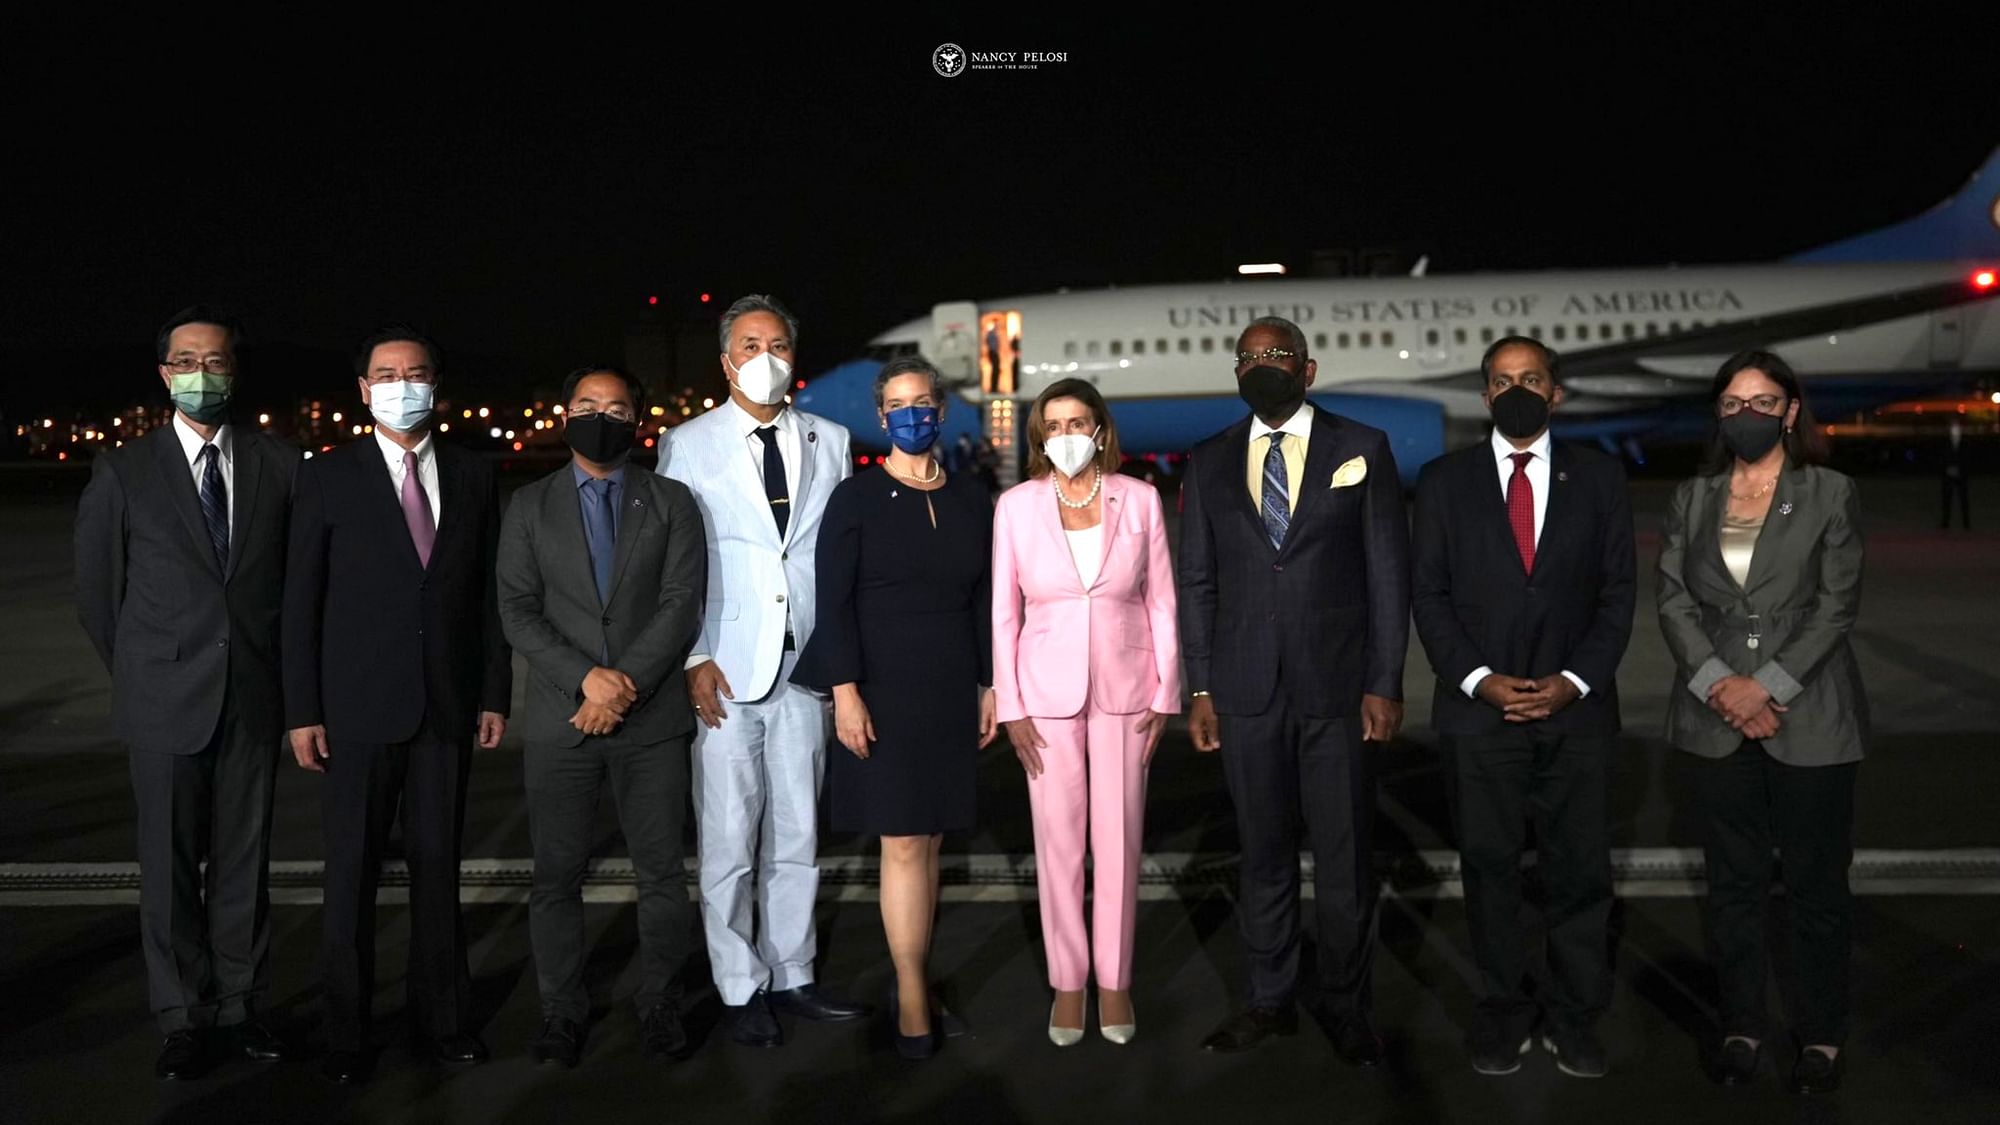 <div class="paragraphs"><p>US House Speaker Nancy Pelosi, center pose for photos after she arrives in Taipei, Taiwan, Tuesday, 2 August. Pelosi arrived in Taiwan on Tuesday night despite threats from Beijing of serious consequences, becoming the highest-ranking American official to visit the self-ruled island claimed by China in 25 years.</p></div>